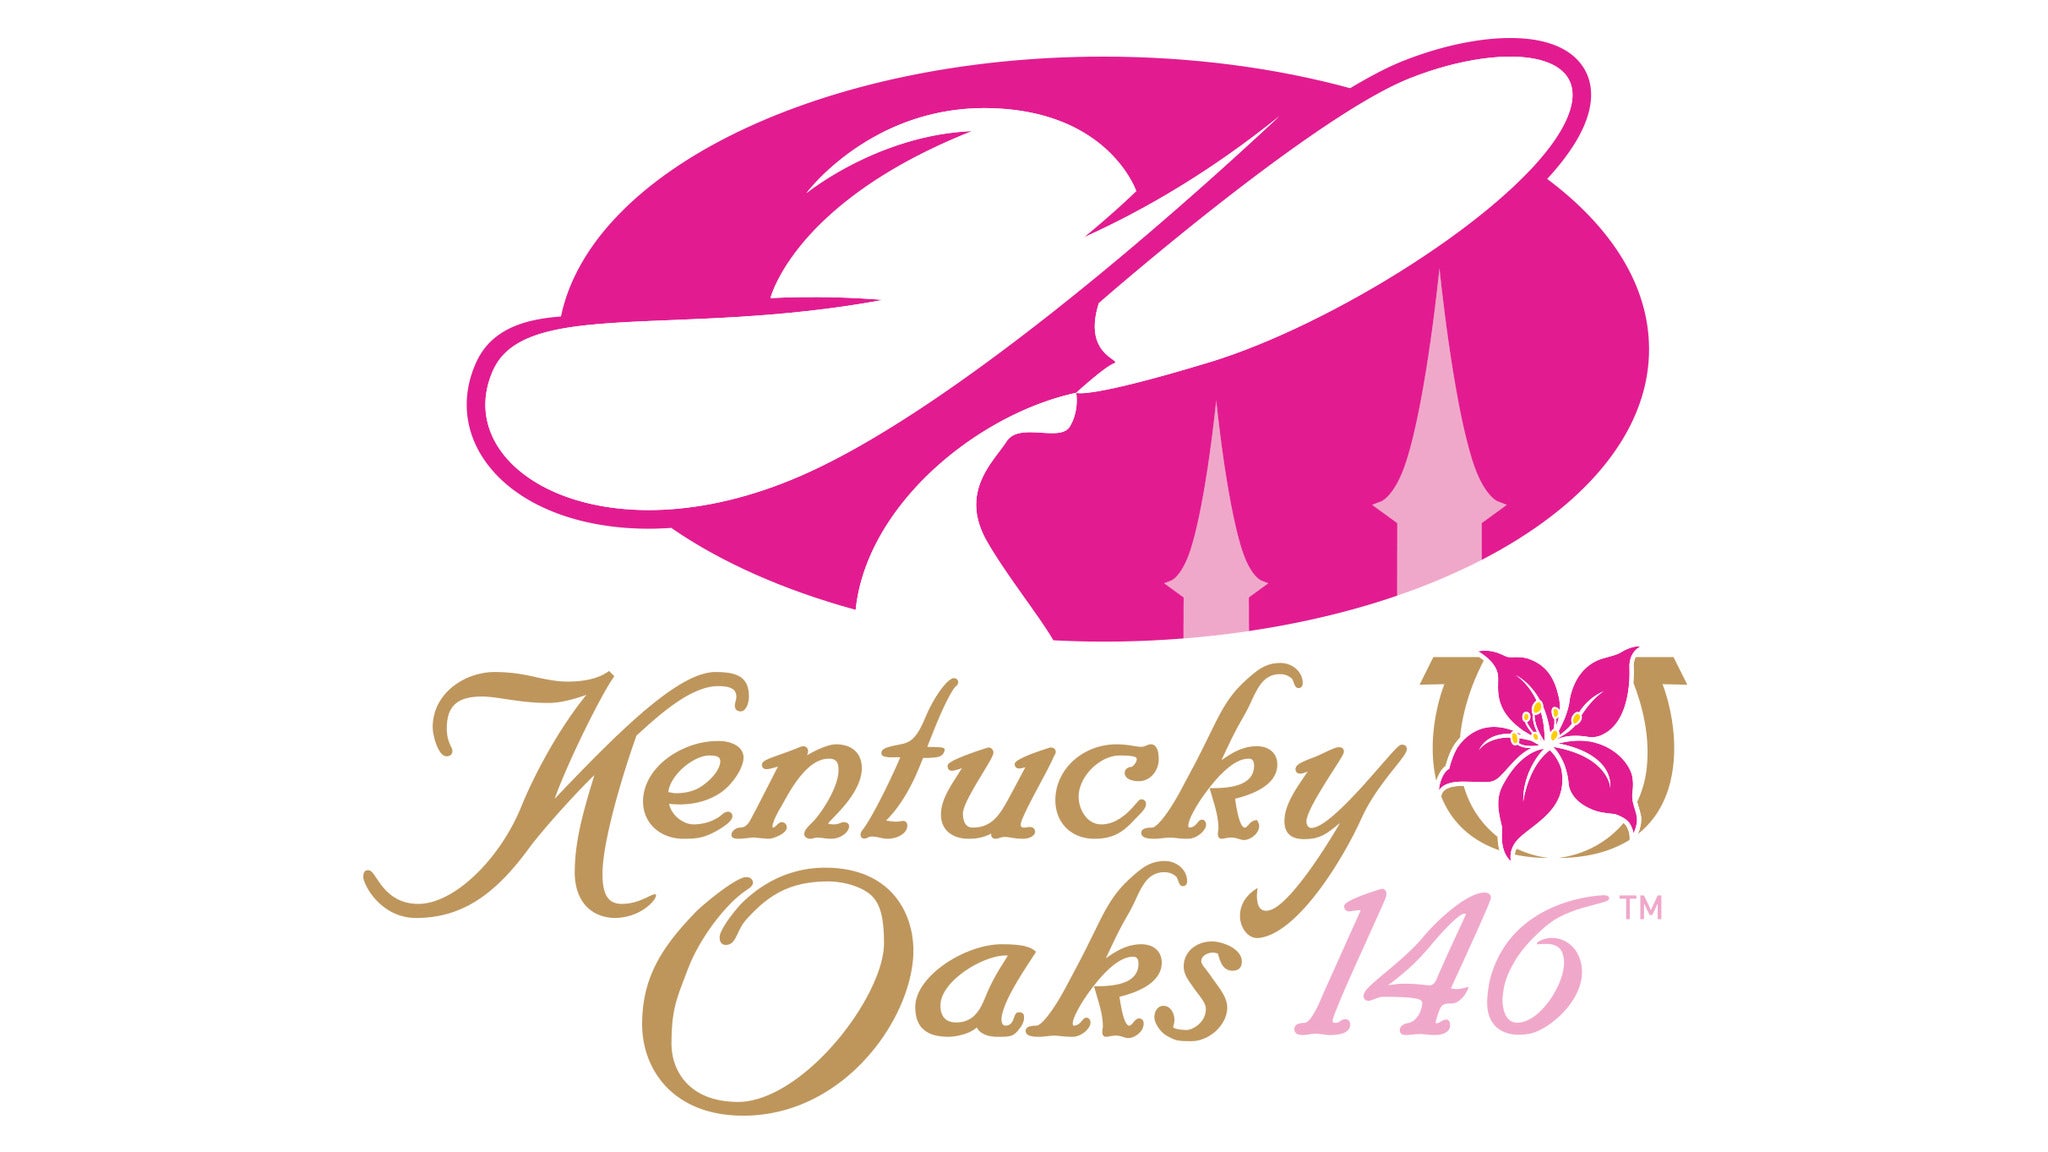 143rd Kentucky Oaks - Infield & Paddock General Admission Single Day in Louisville promo photo for Standard Purchase Pricing presale offer code